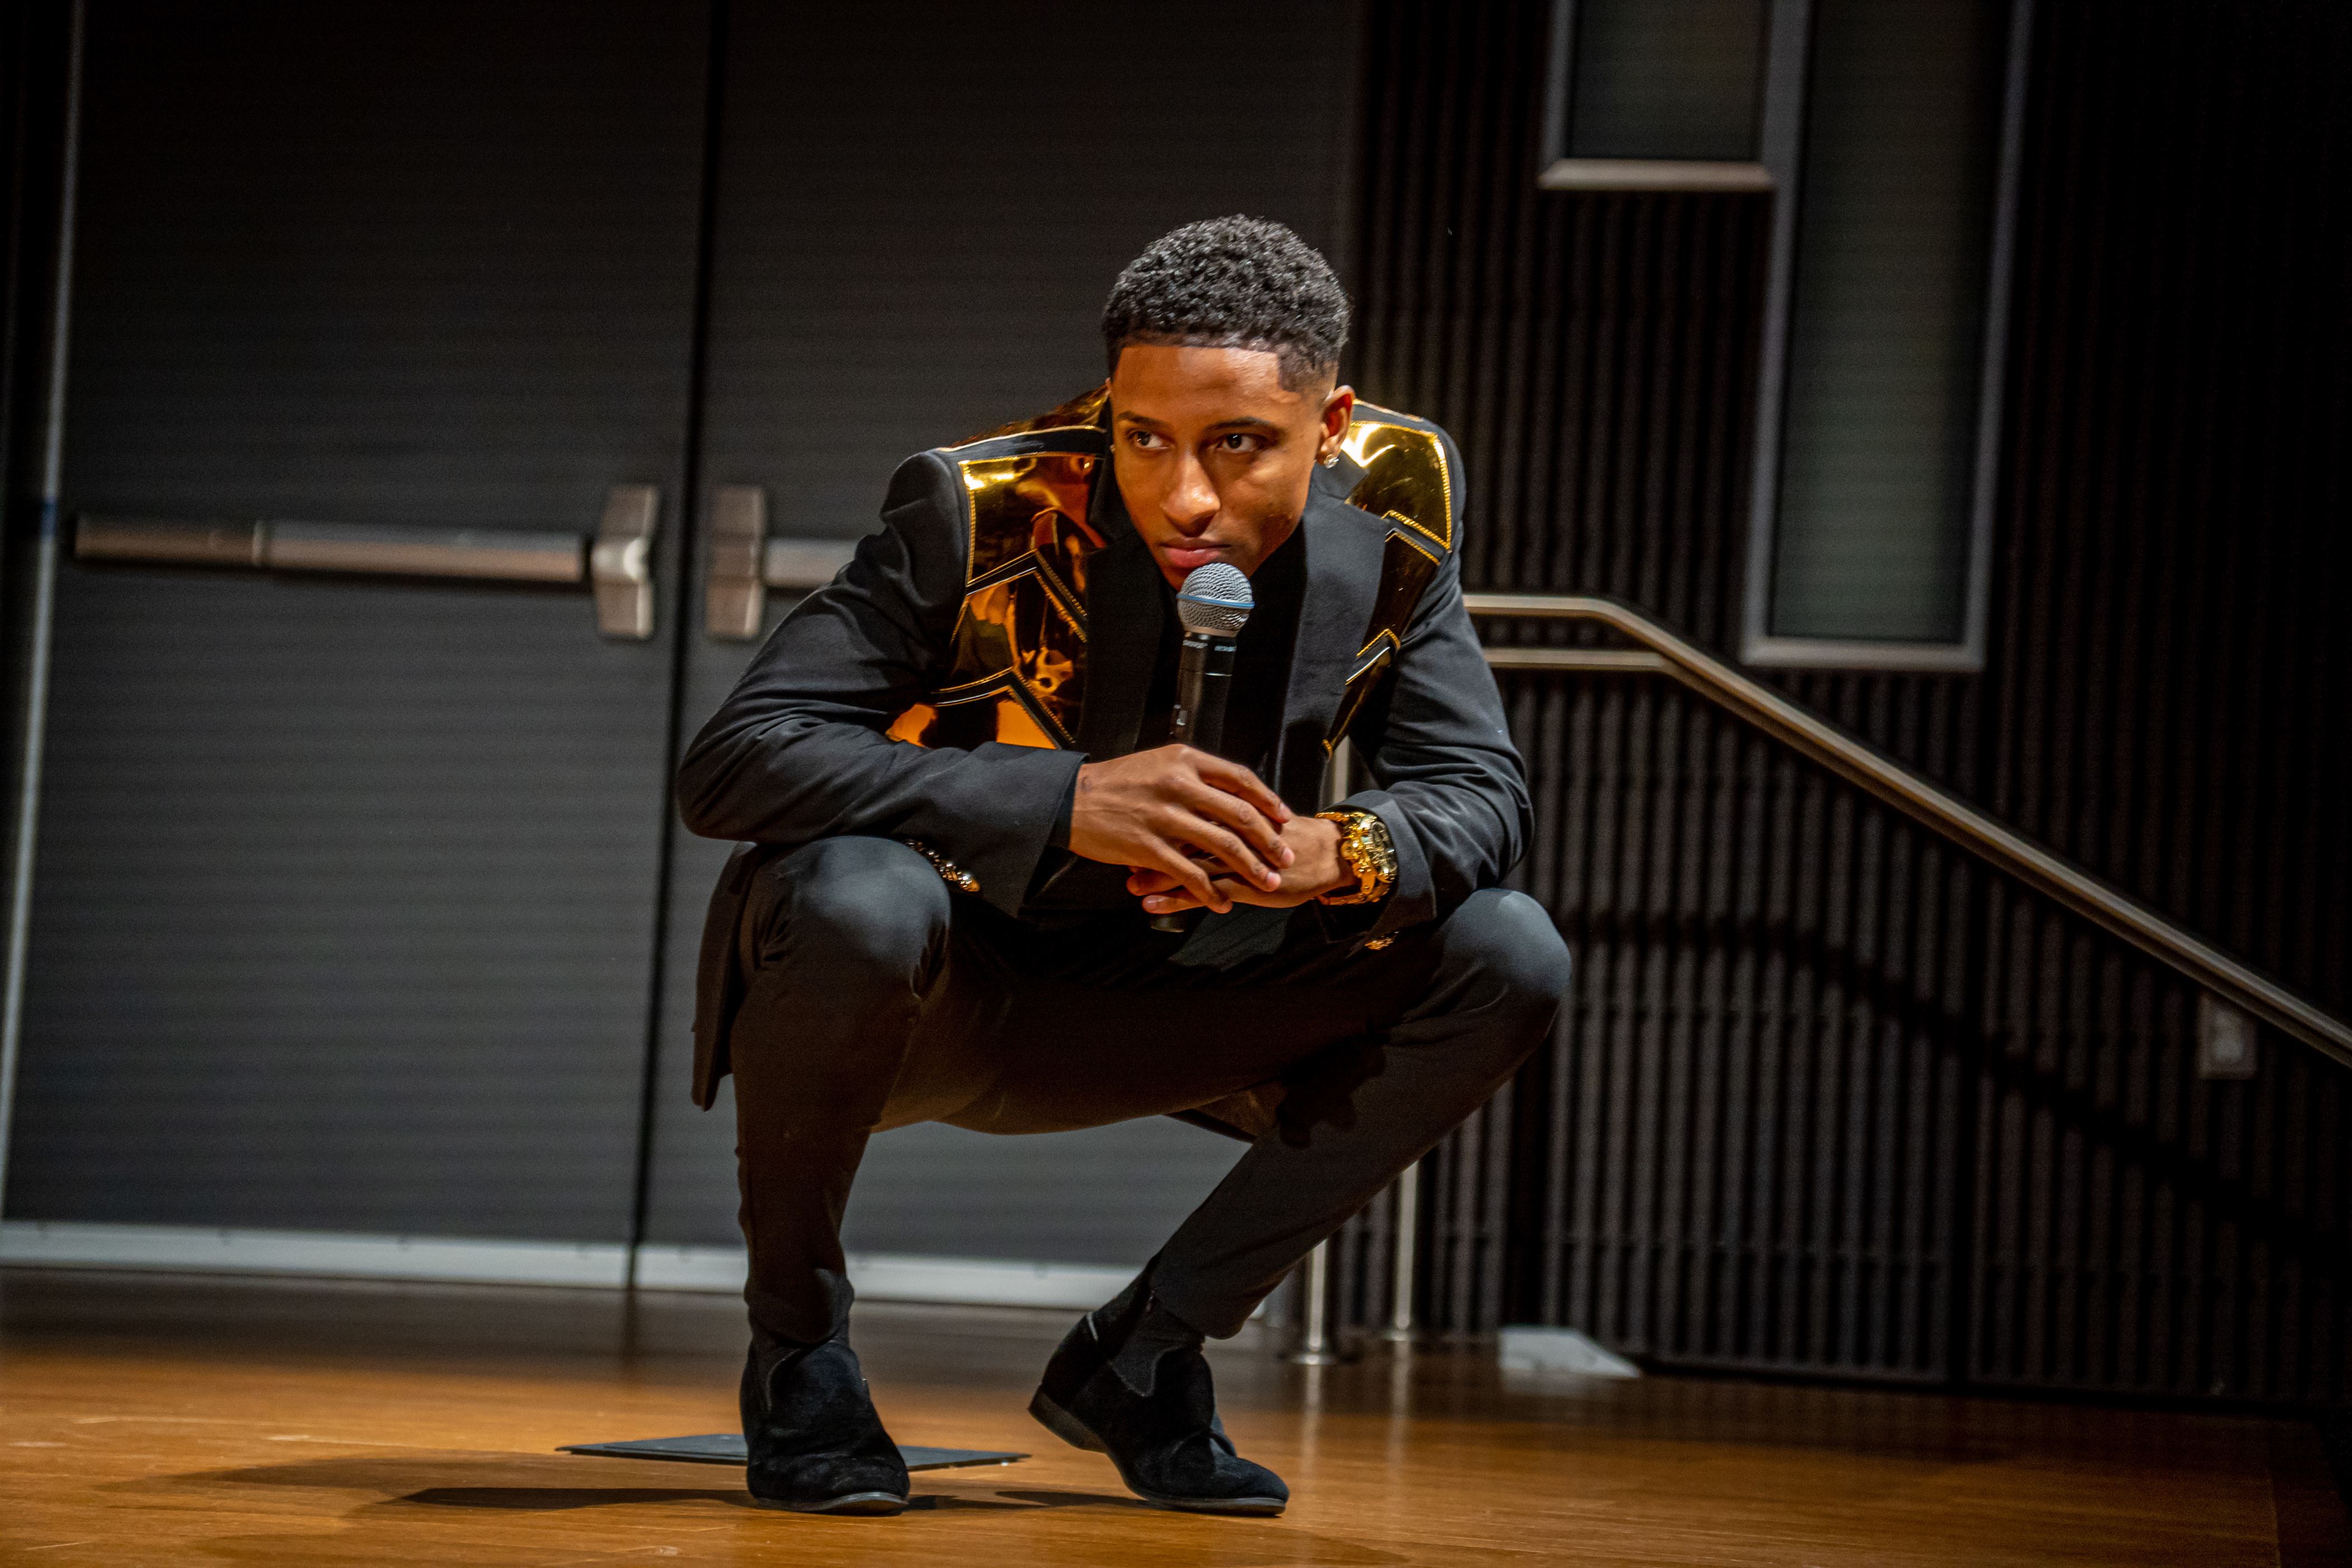 Myles Frost demonstrates the way Tone Talauega trained him to dance like Michael Jackson. Lynise Olivacce | The Montclarion